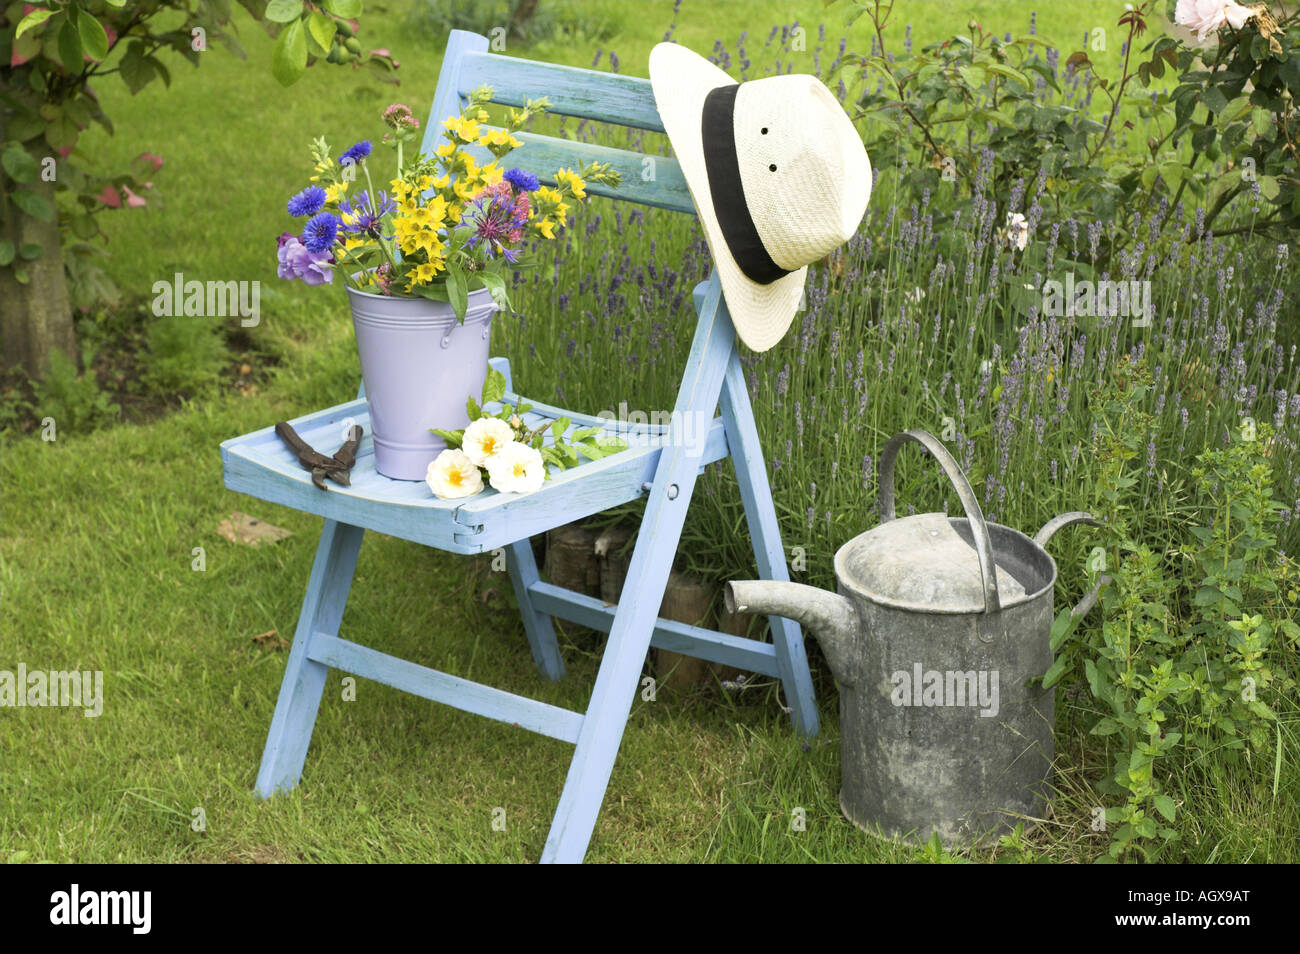 Traditonal english Summer country Garden scene with cut flowers in bucket on garden seat Stock Photo